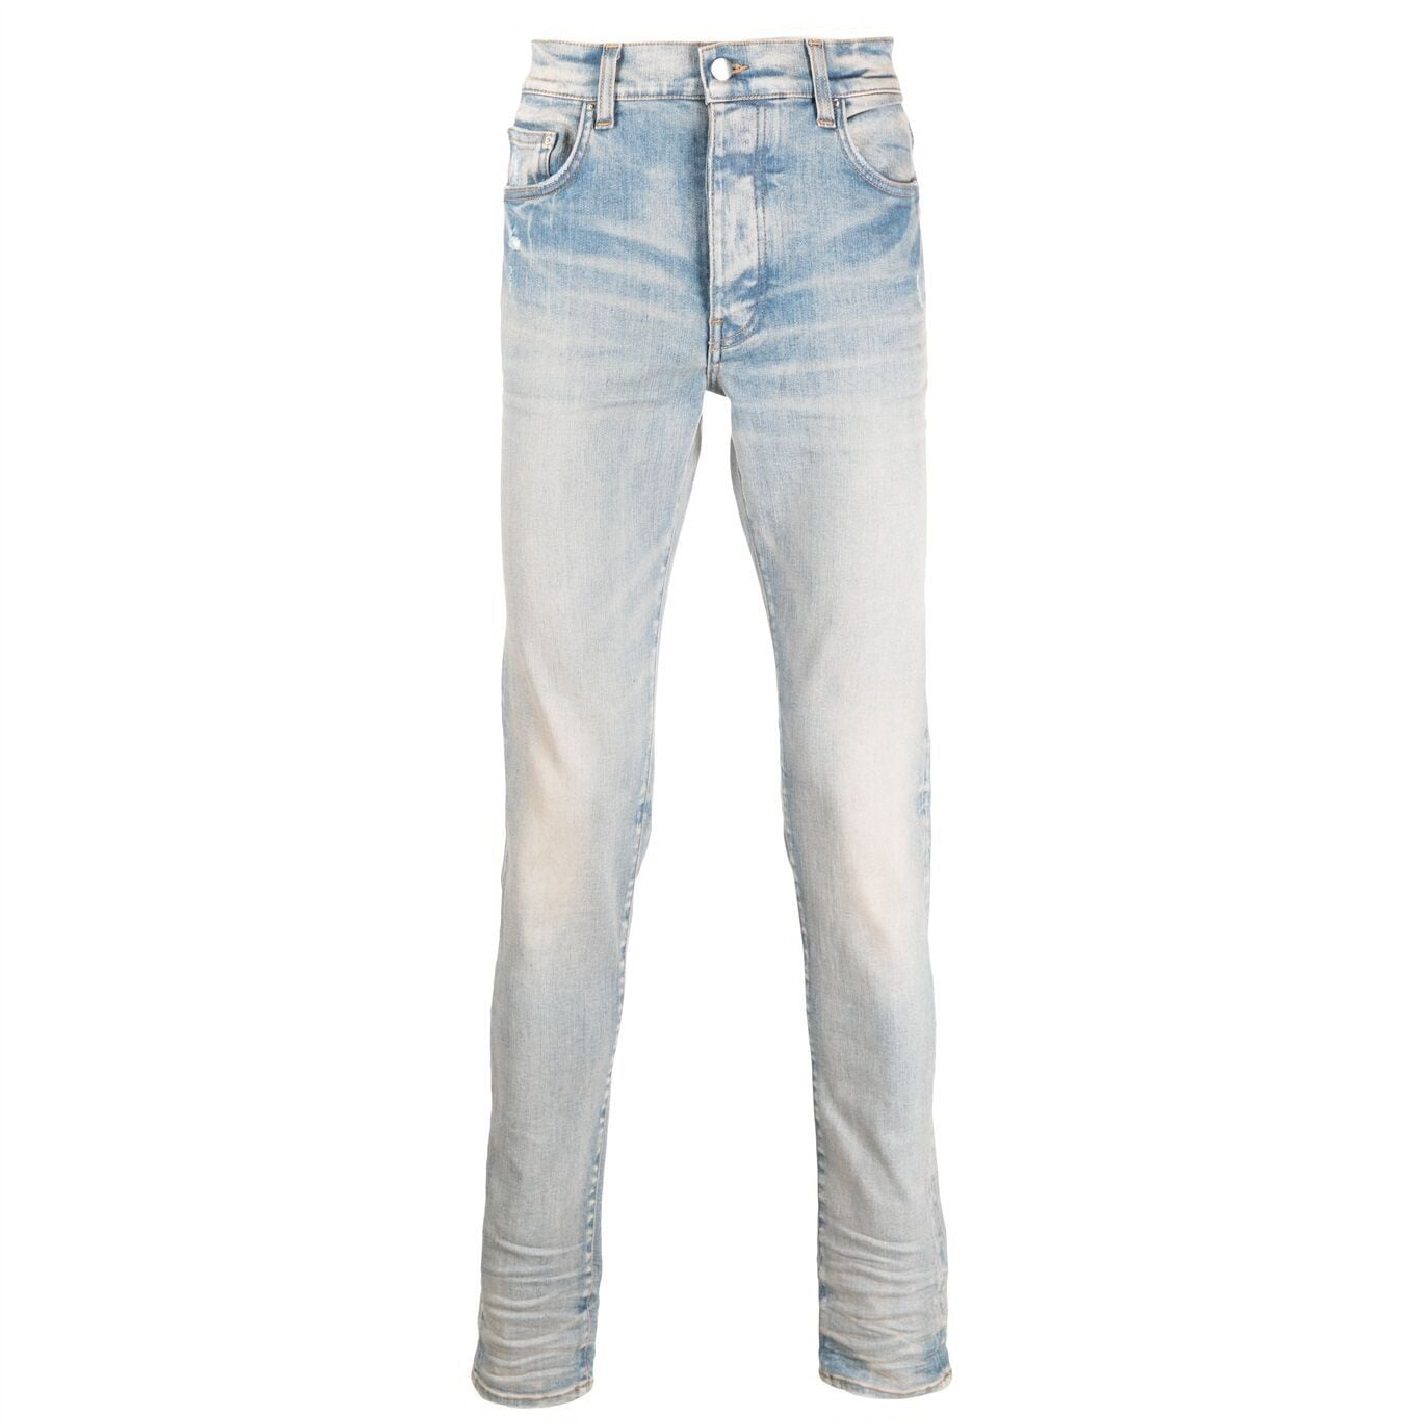 AMIRI MID-RISE SKINNY JEANS - Clothes Rep